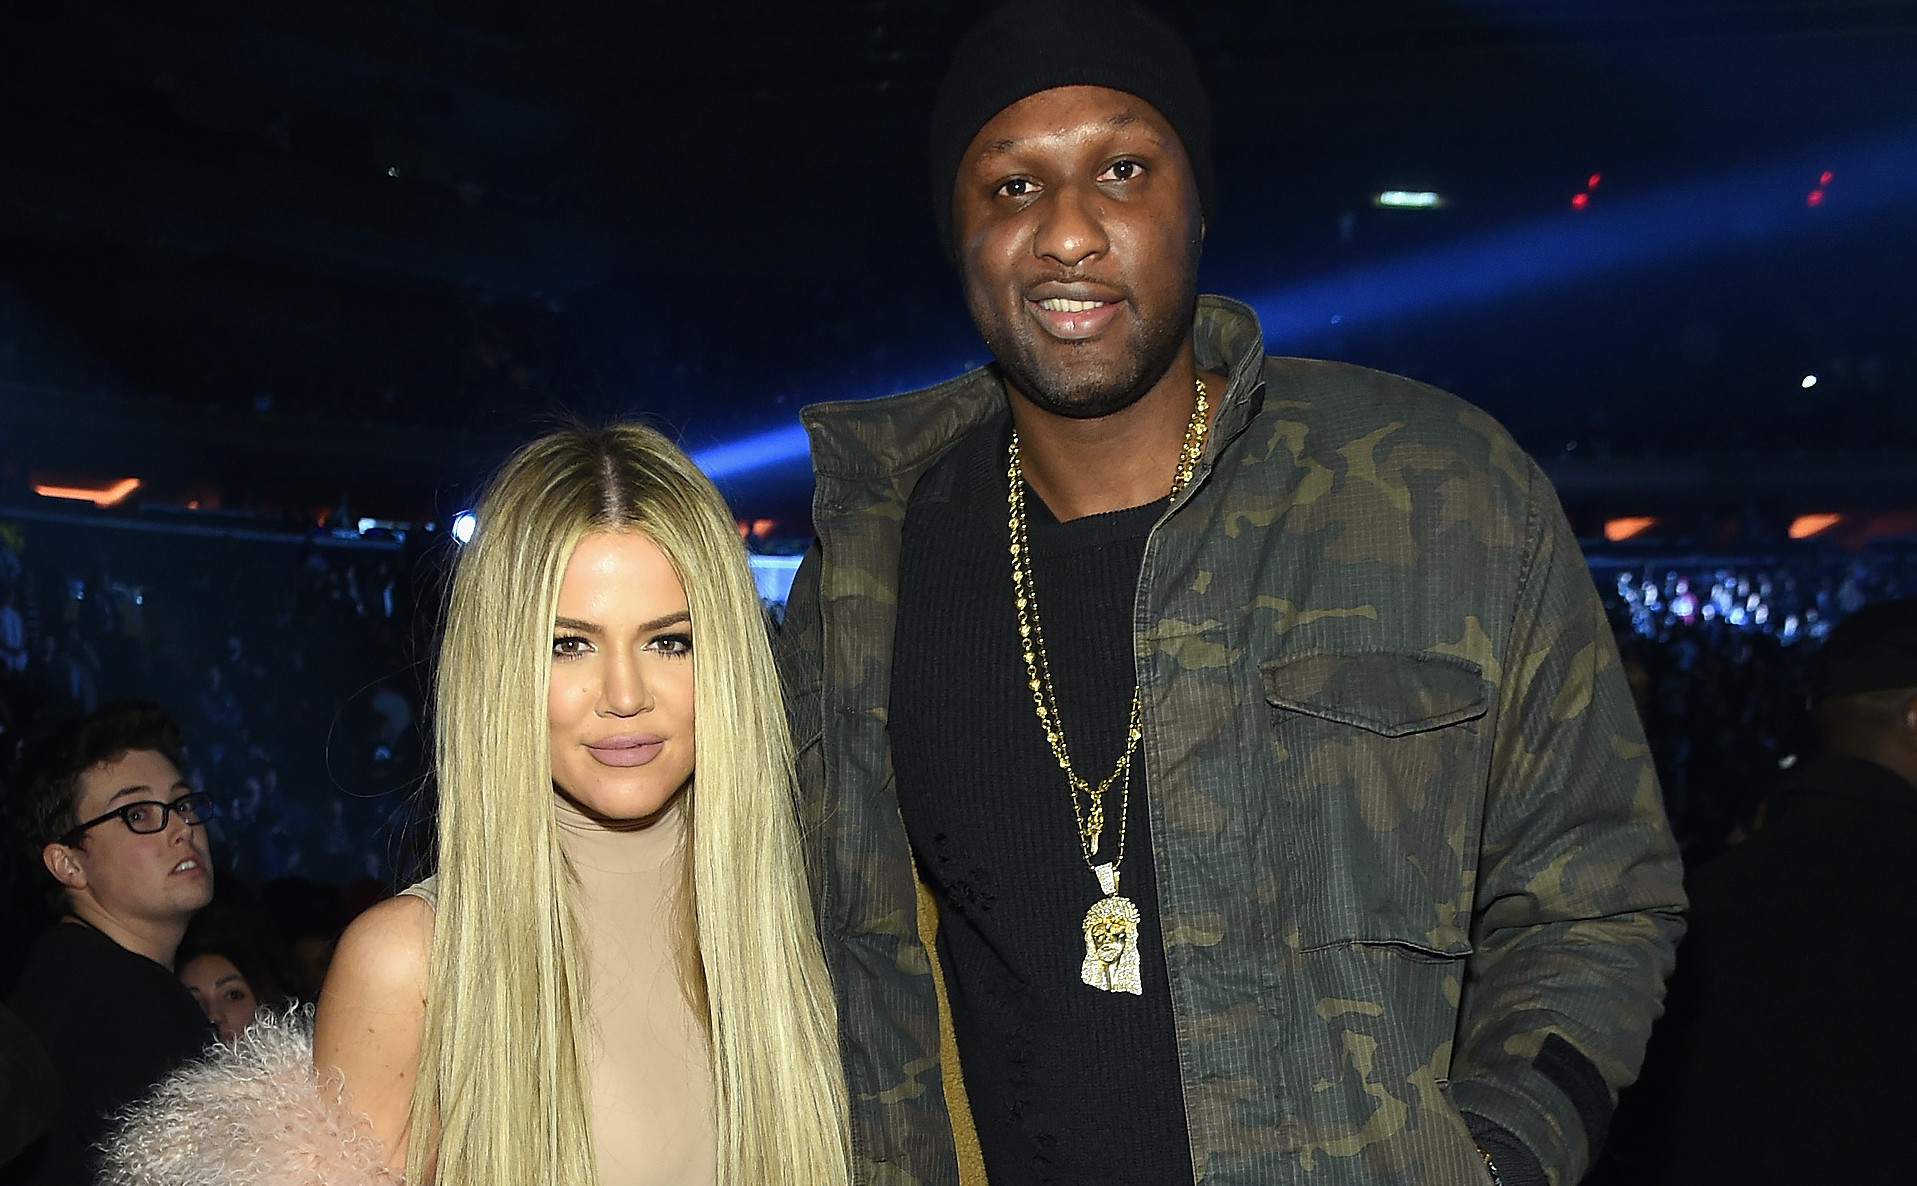 everything khloe and lamar have said about each other